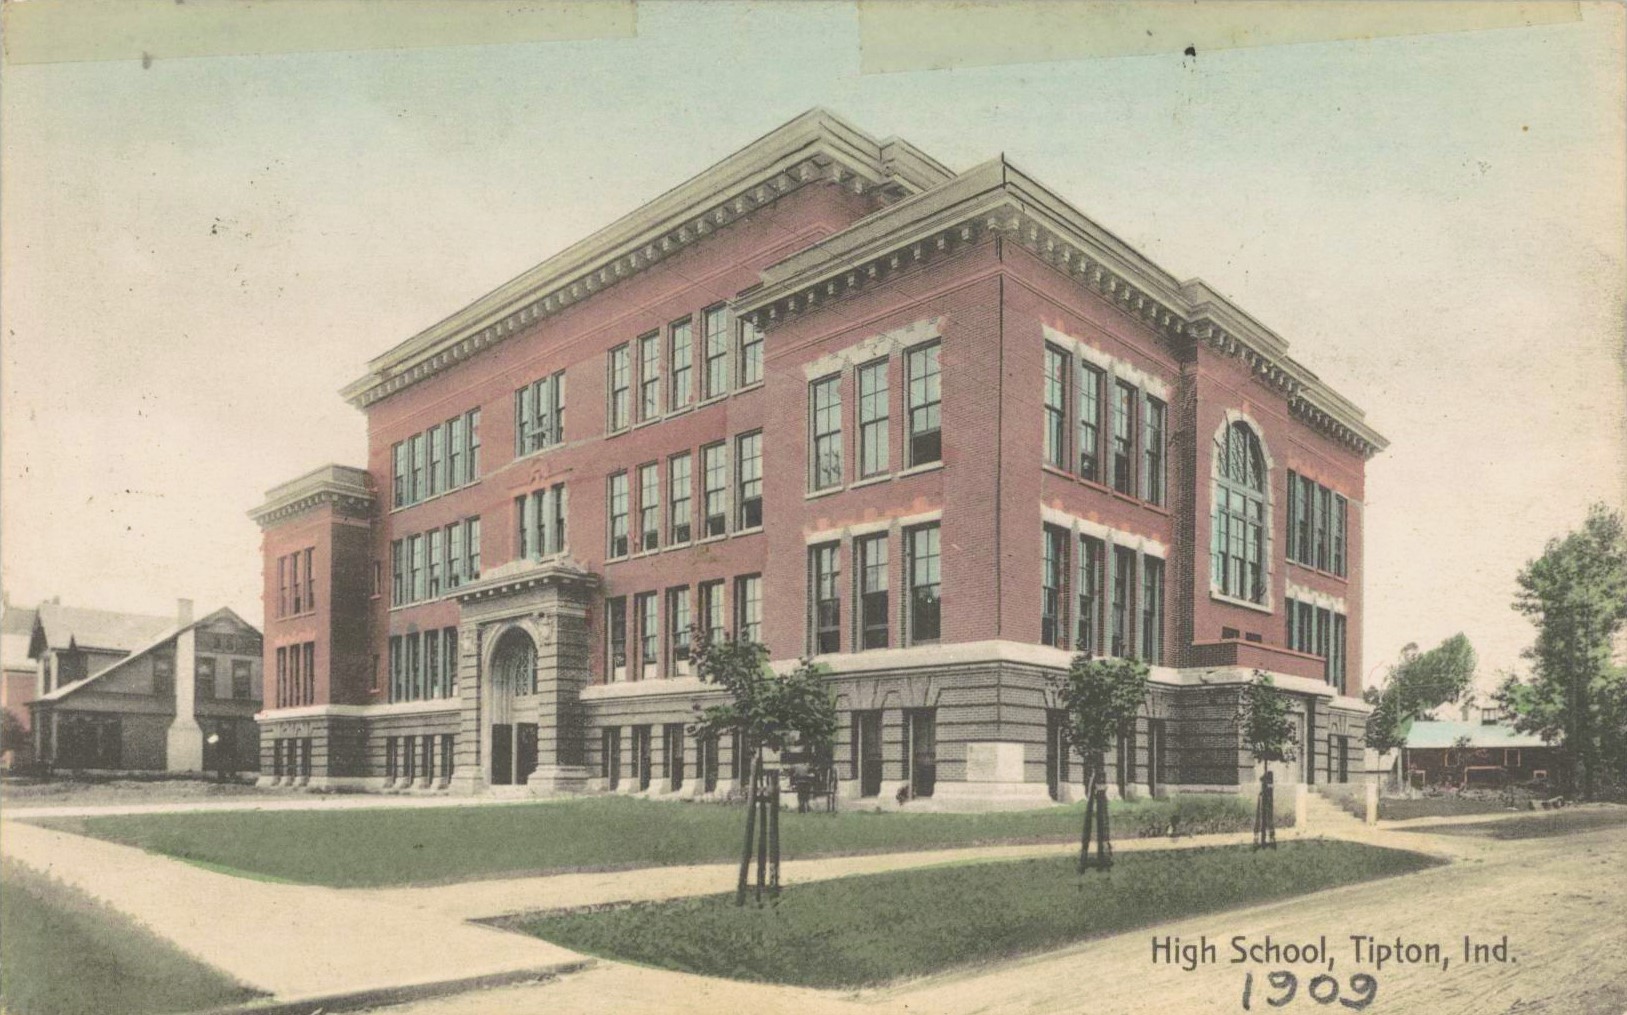 Tipton High School in 1909. A few new trees stand in front of the building, which looks to be four stories tall.